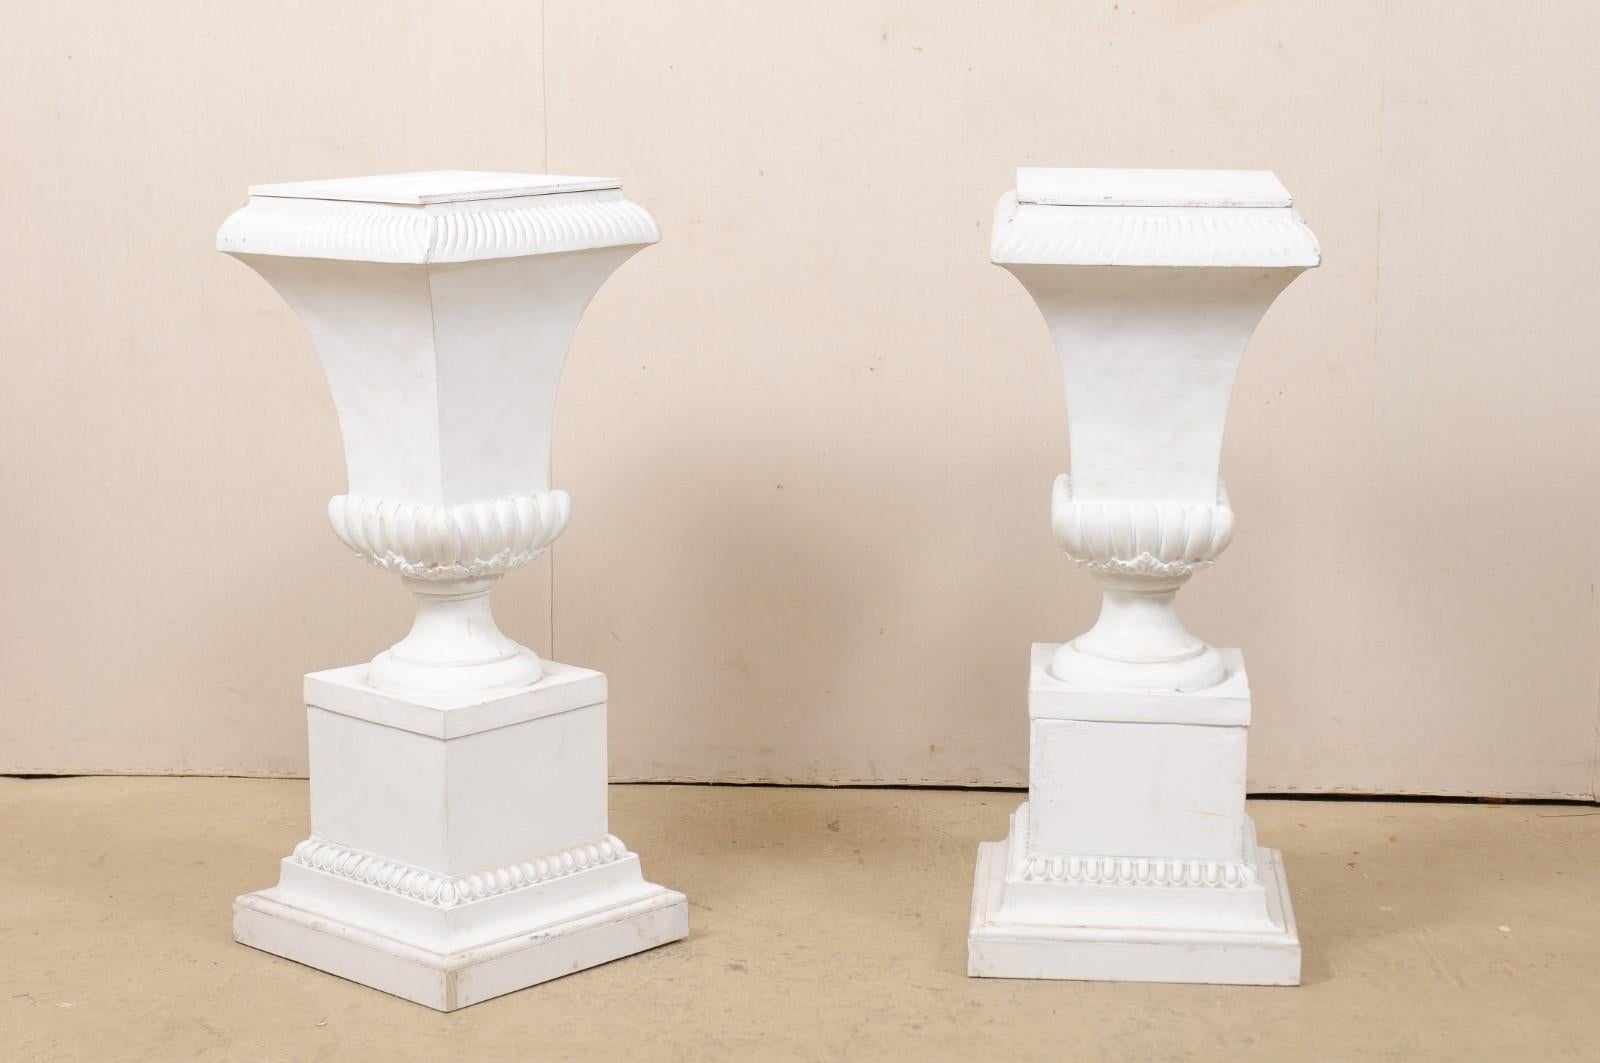 A pair of vintage American fiberglass pedestals. This pair of pedestals each stand approximately 3.75 feet in height, feature urn-shaped bodies with egg-and-dart and foliage adornment, and raised upon stacked square shaped bases. The urns are